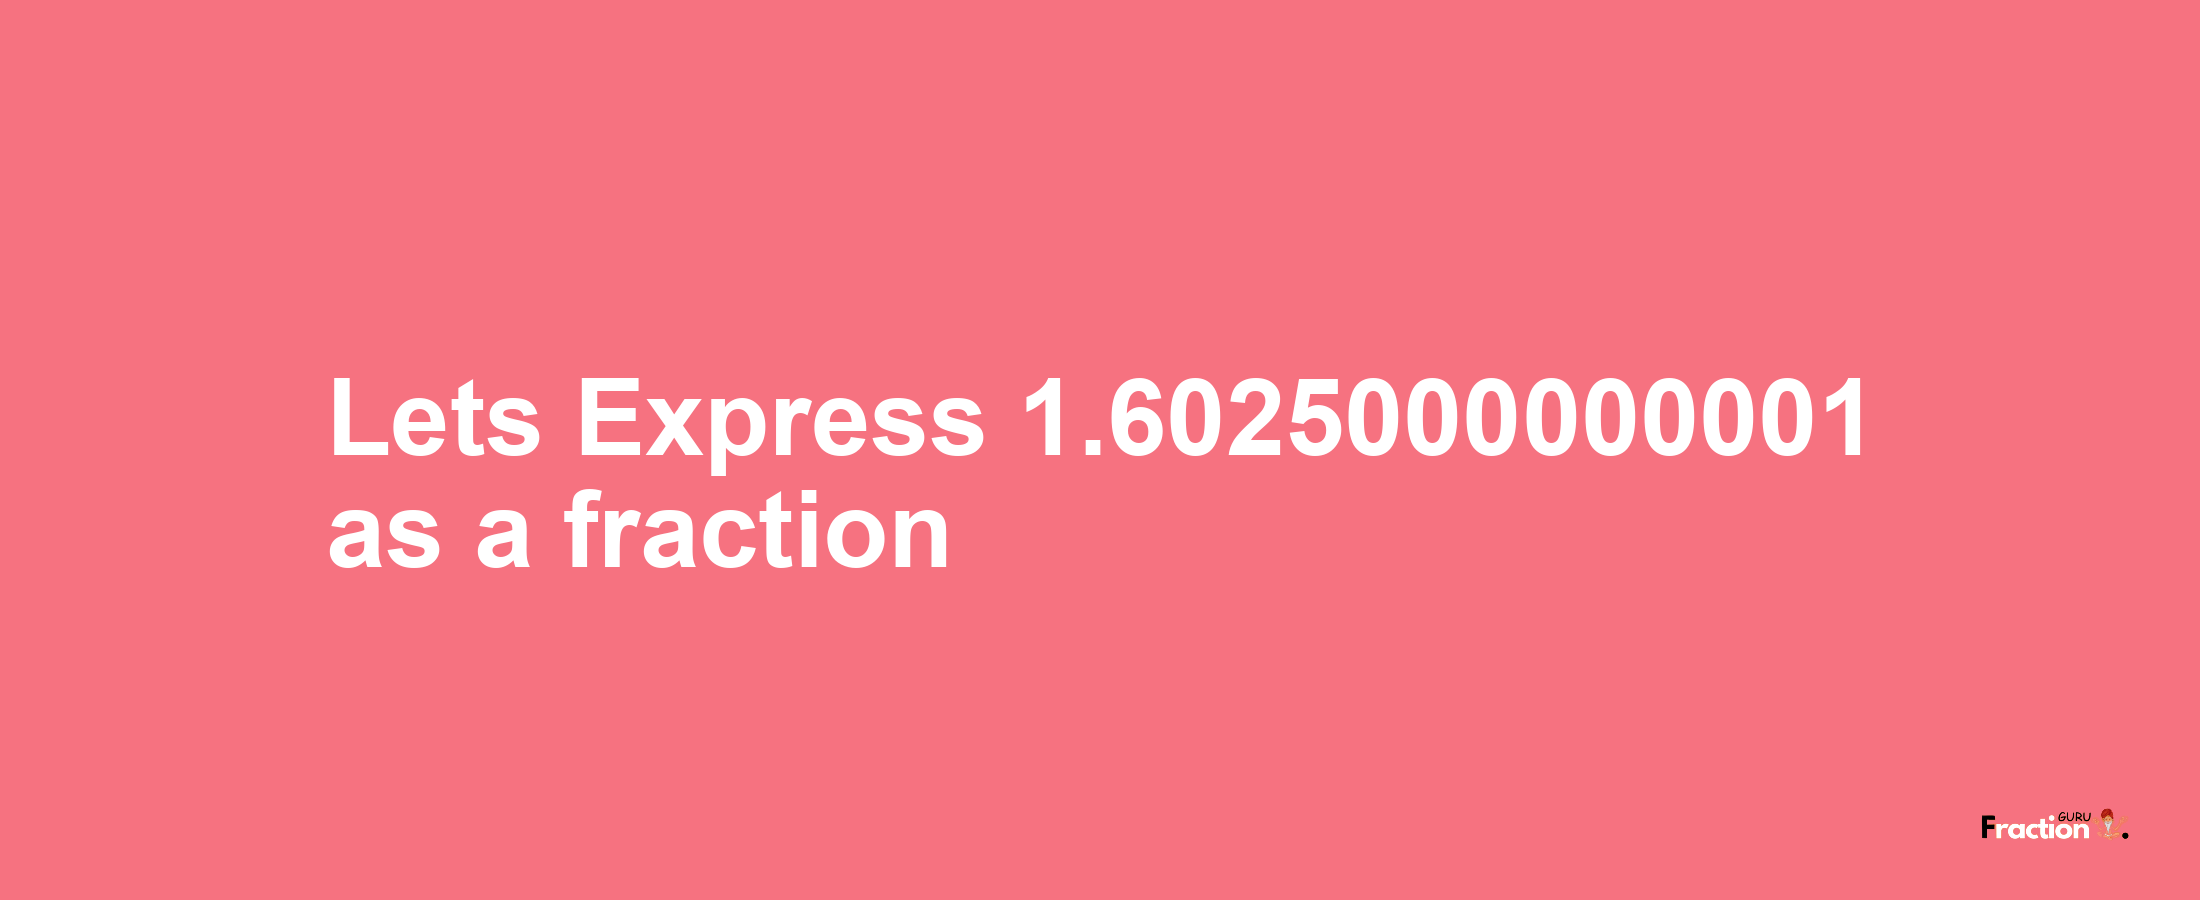 Lets Express 1.6025000000001 as afraction